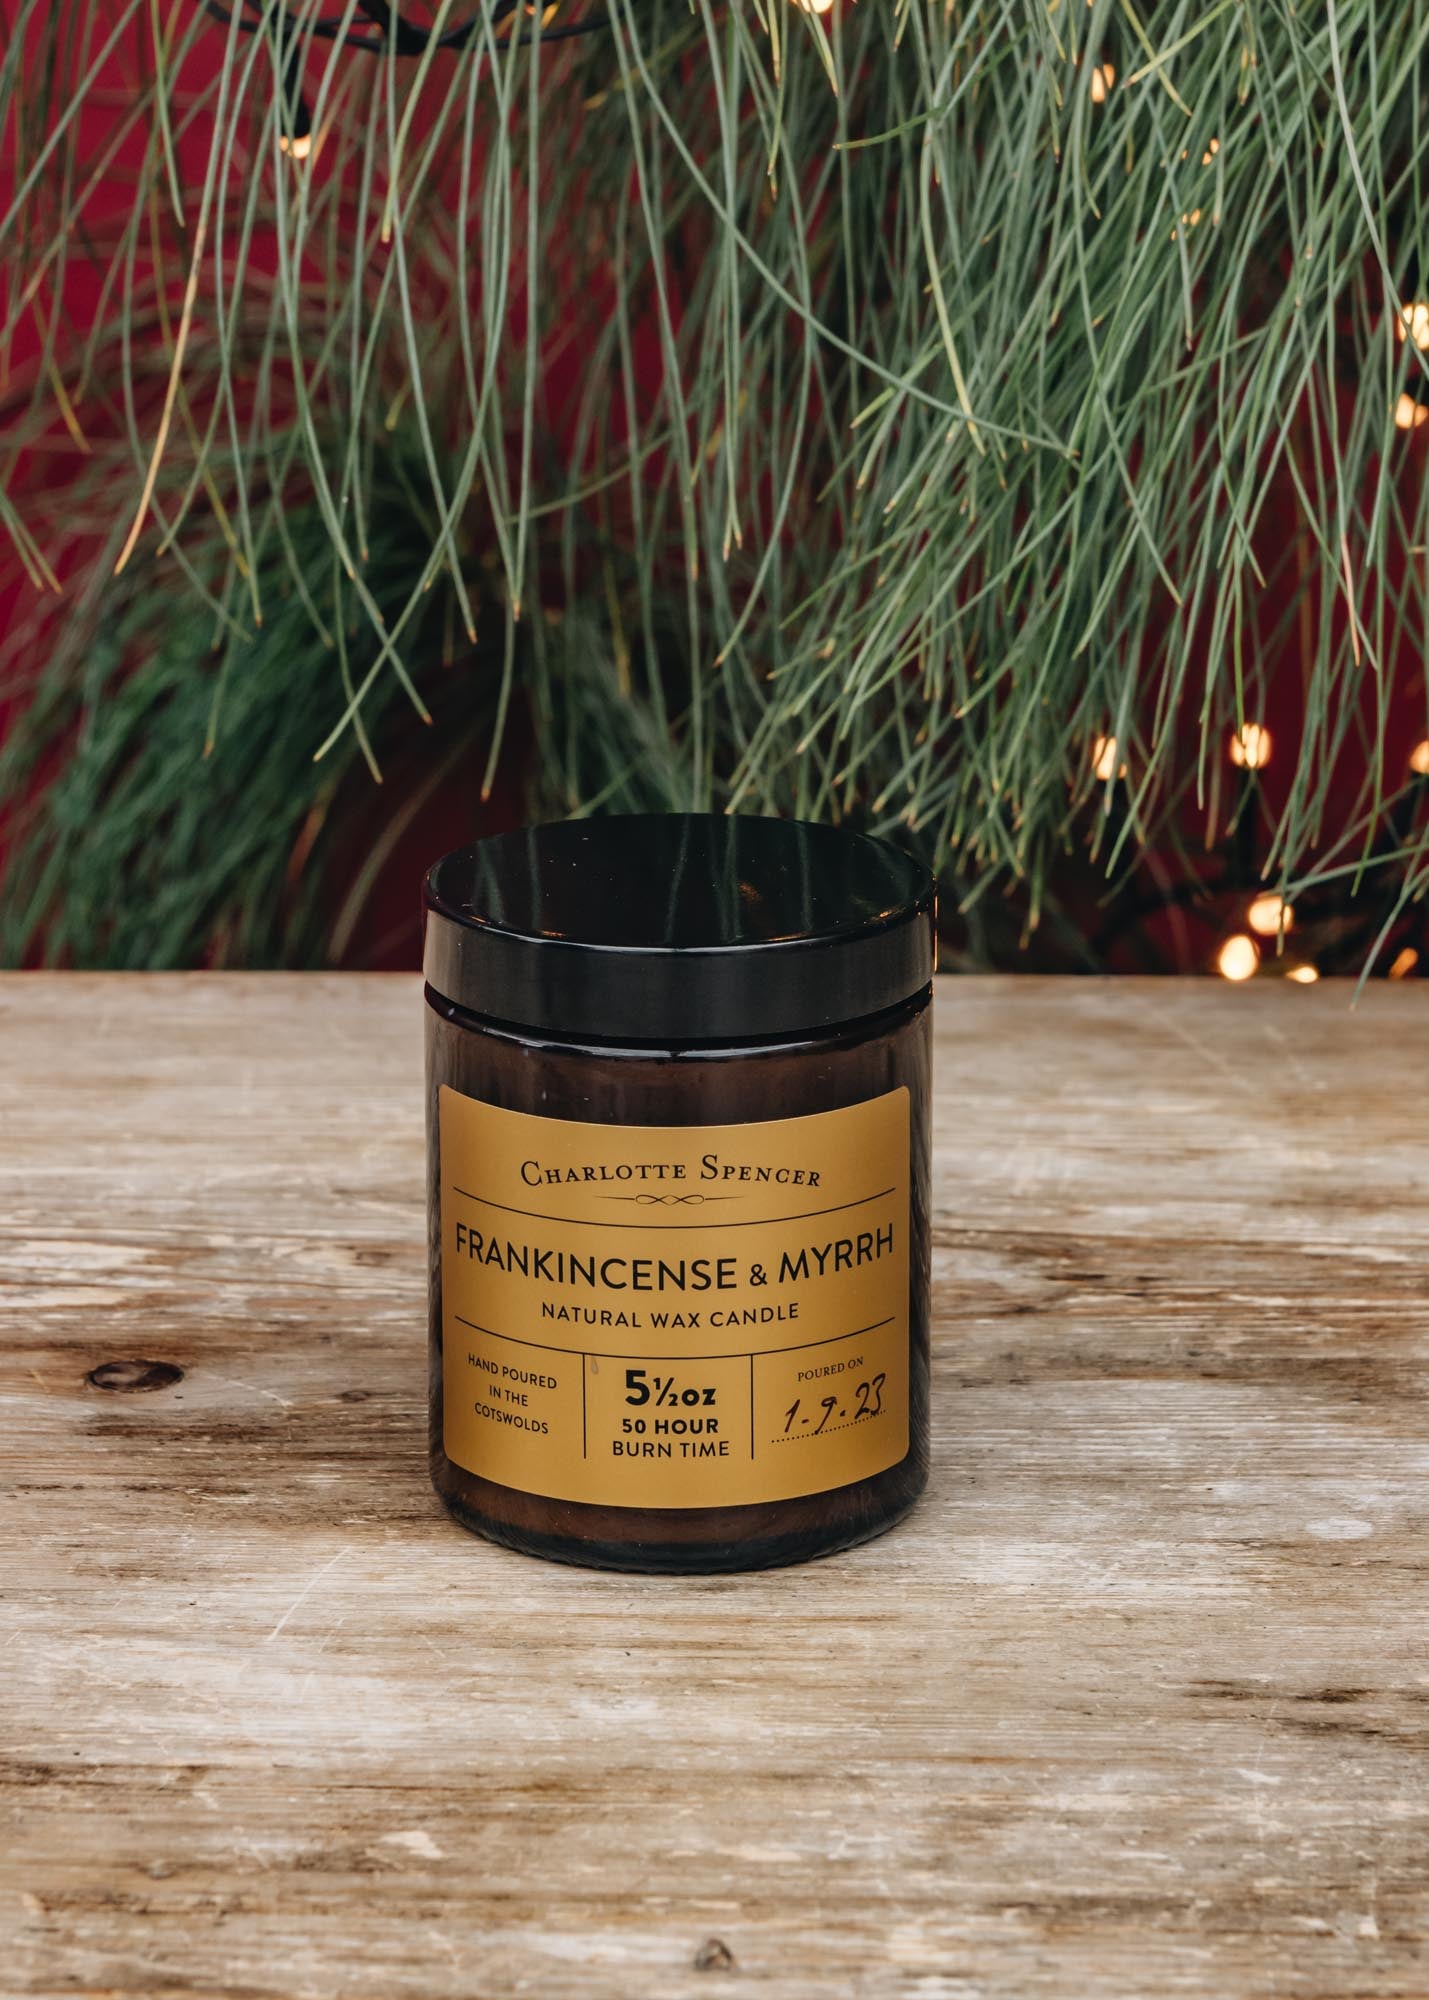 Charlotte Spencer Scented Candle in Frankincense and Myrrh, 5.5oz